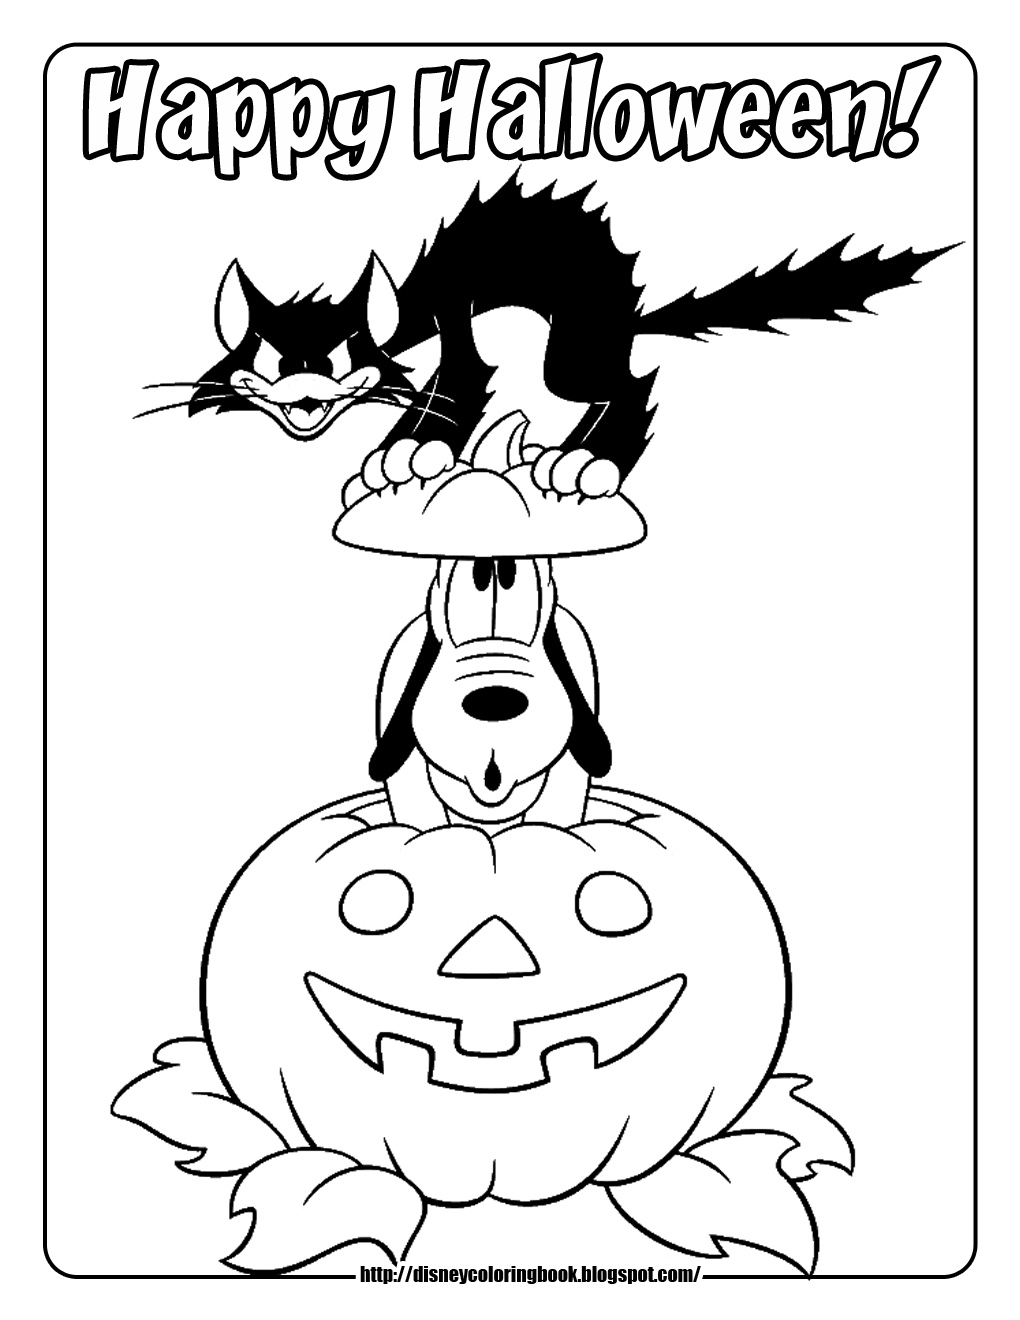 Disney coloring pages and sheets for kids mickey and friends halloween free disney halloween coloring pages